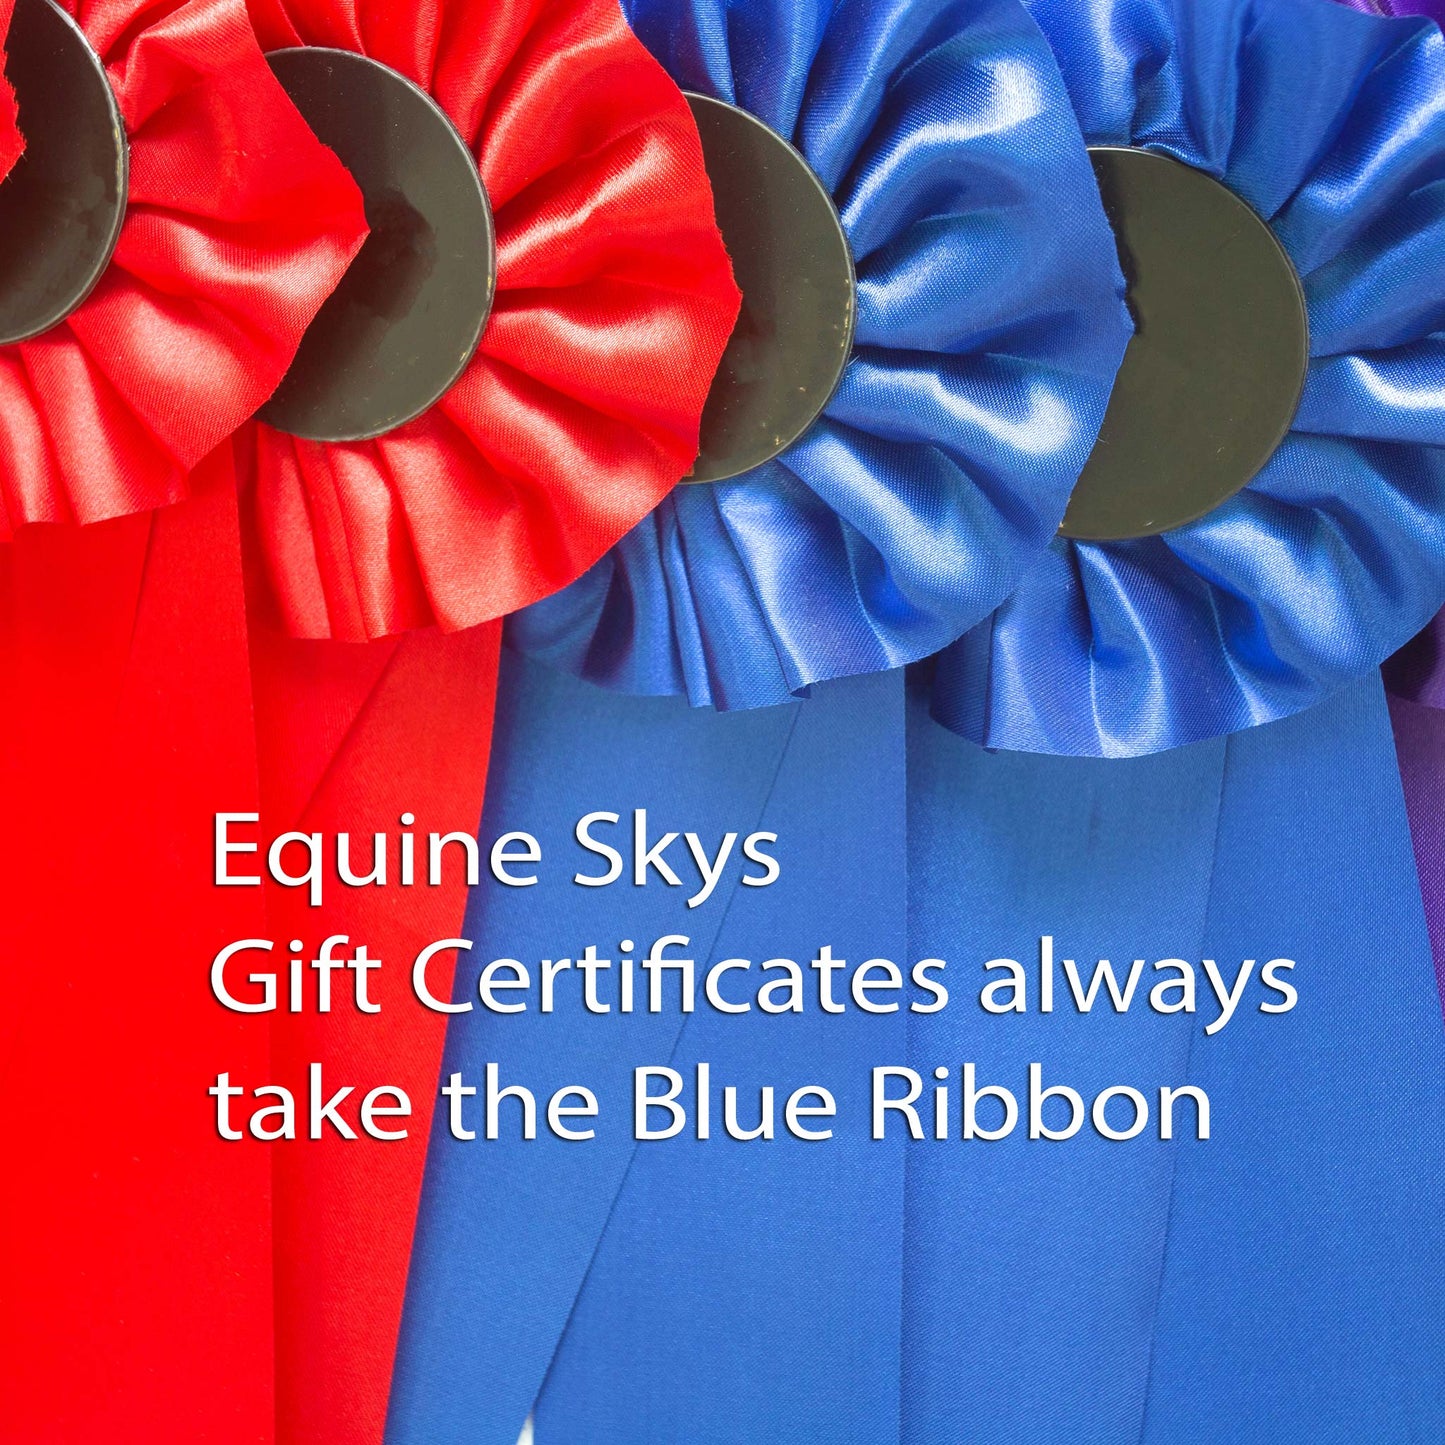 EquineSkys Gift Certificates